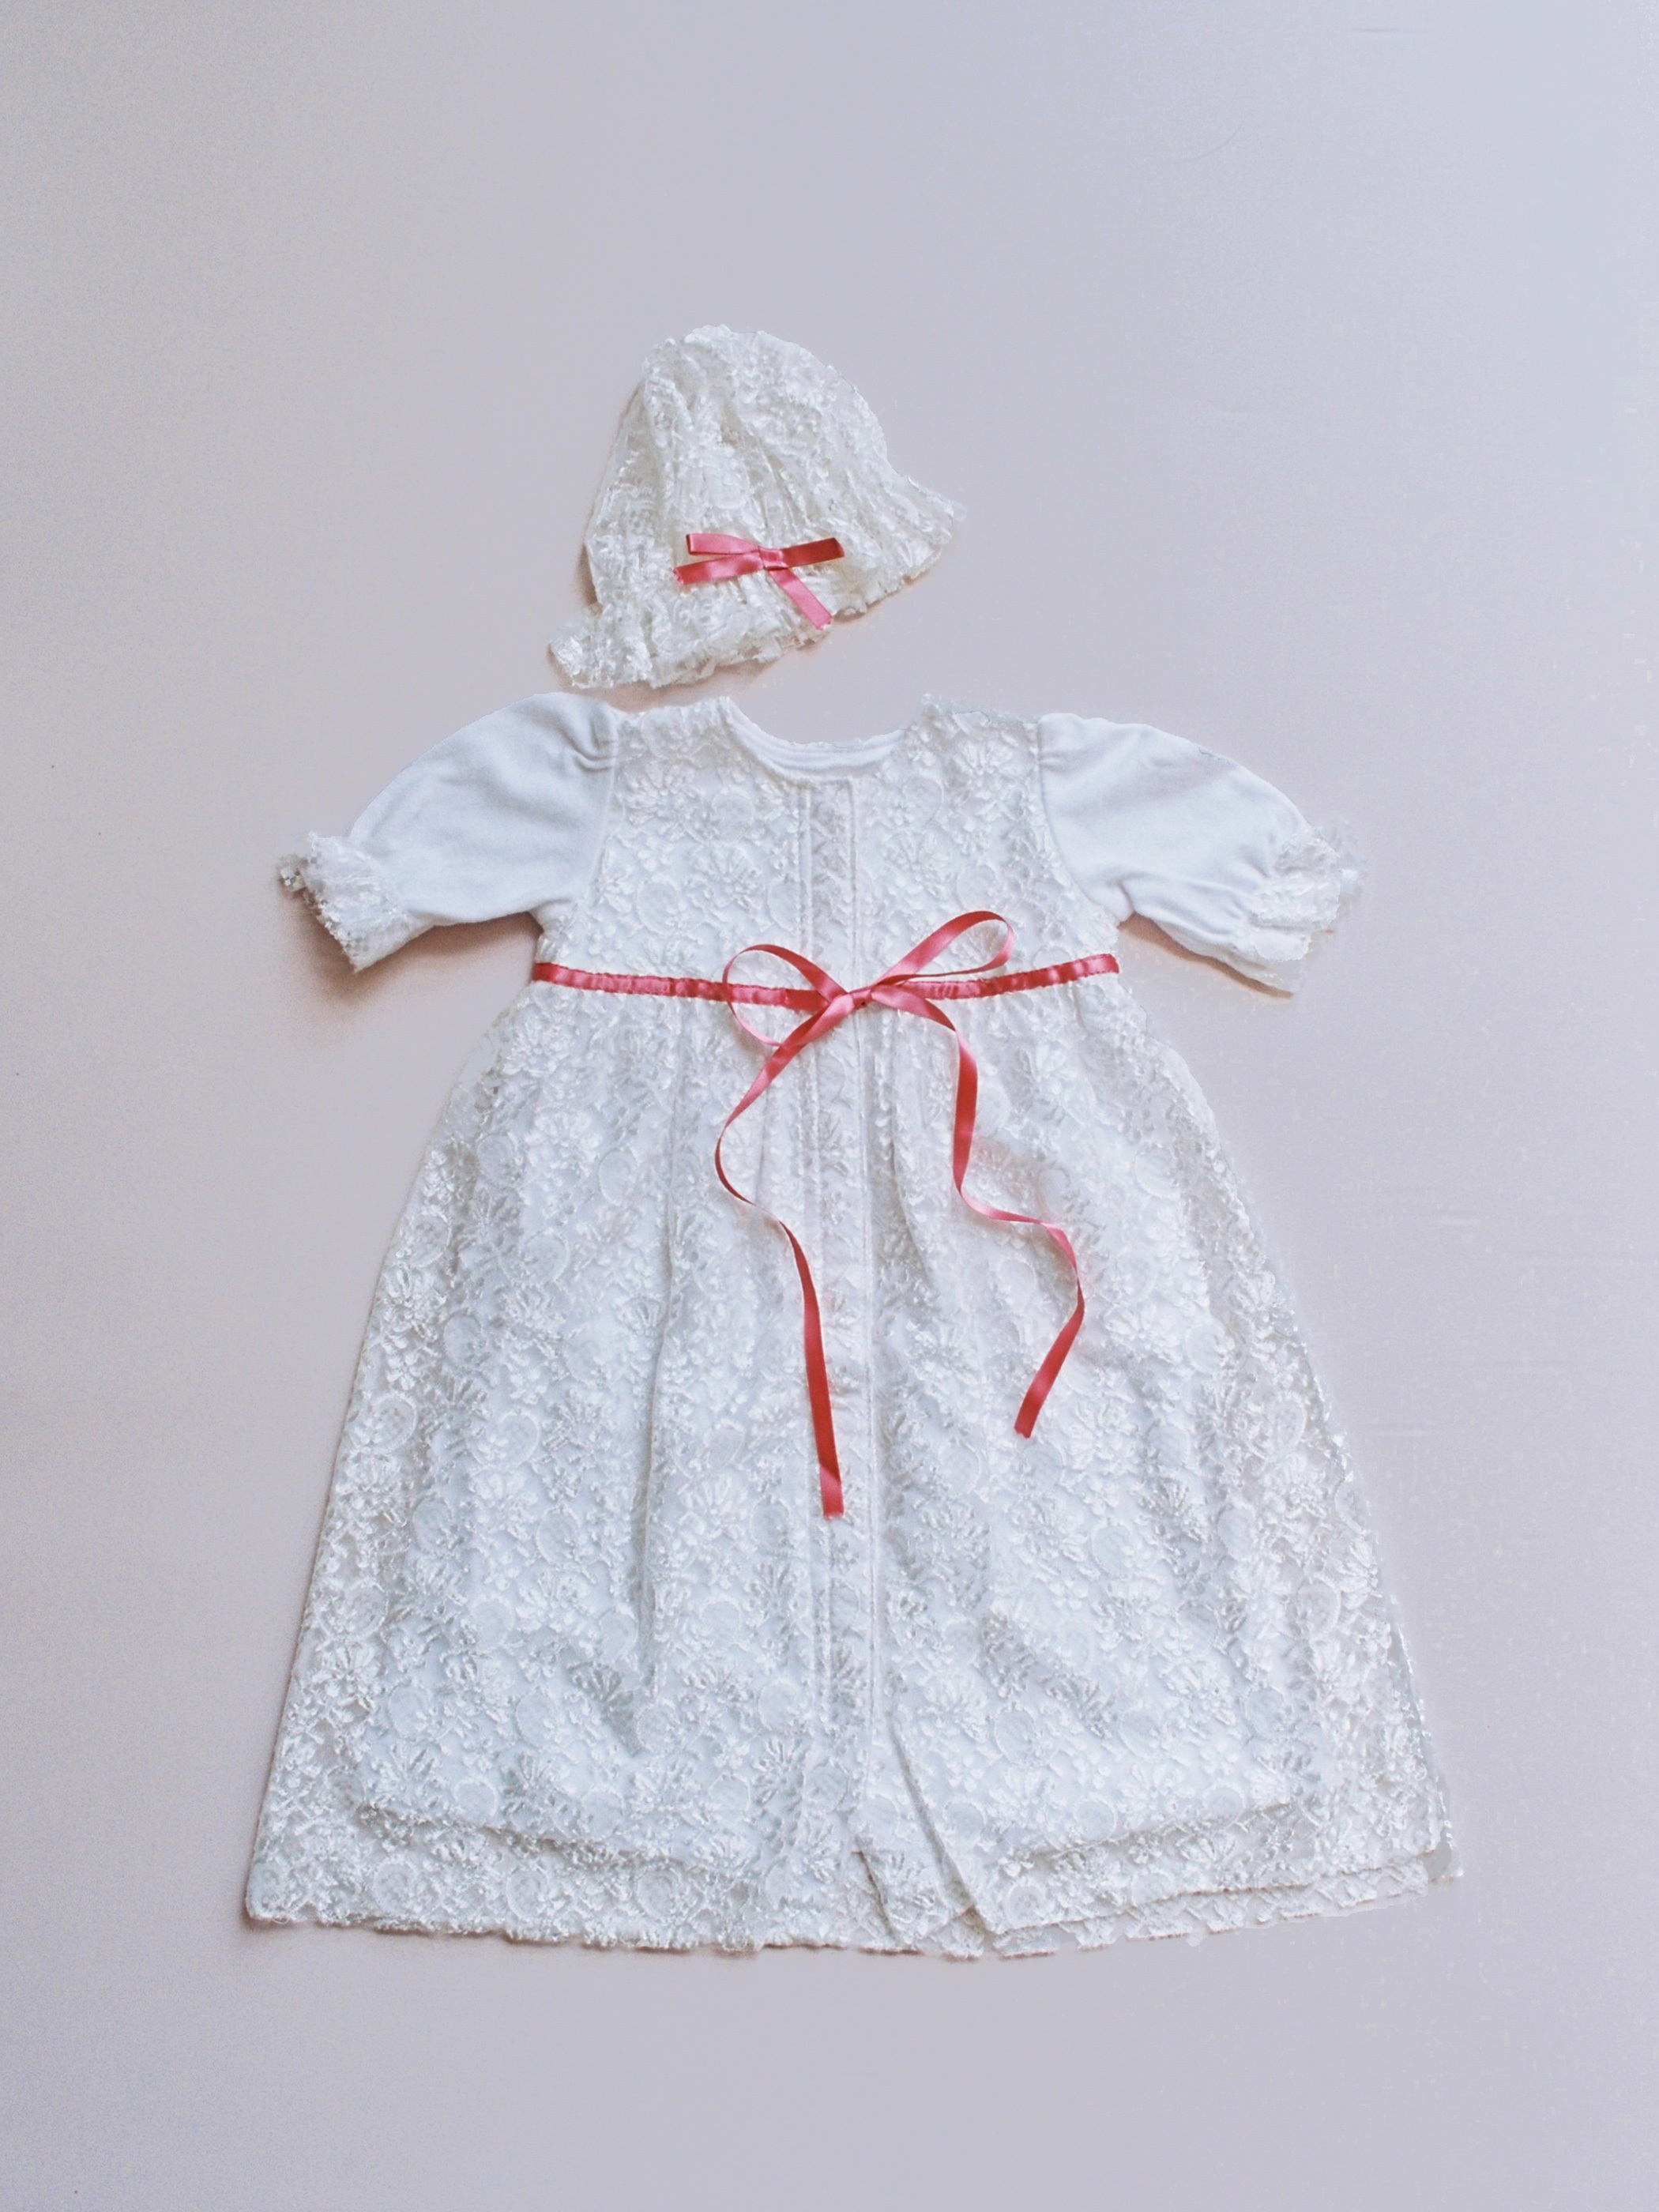 All Lace baby dress with cap